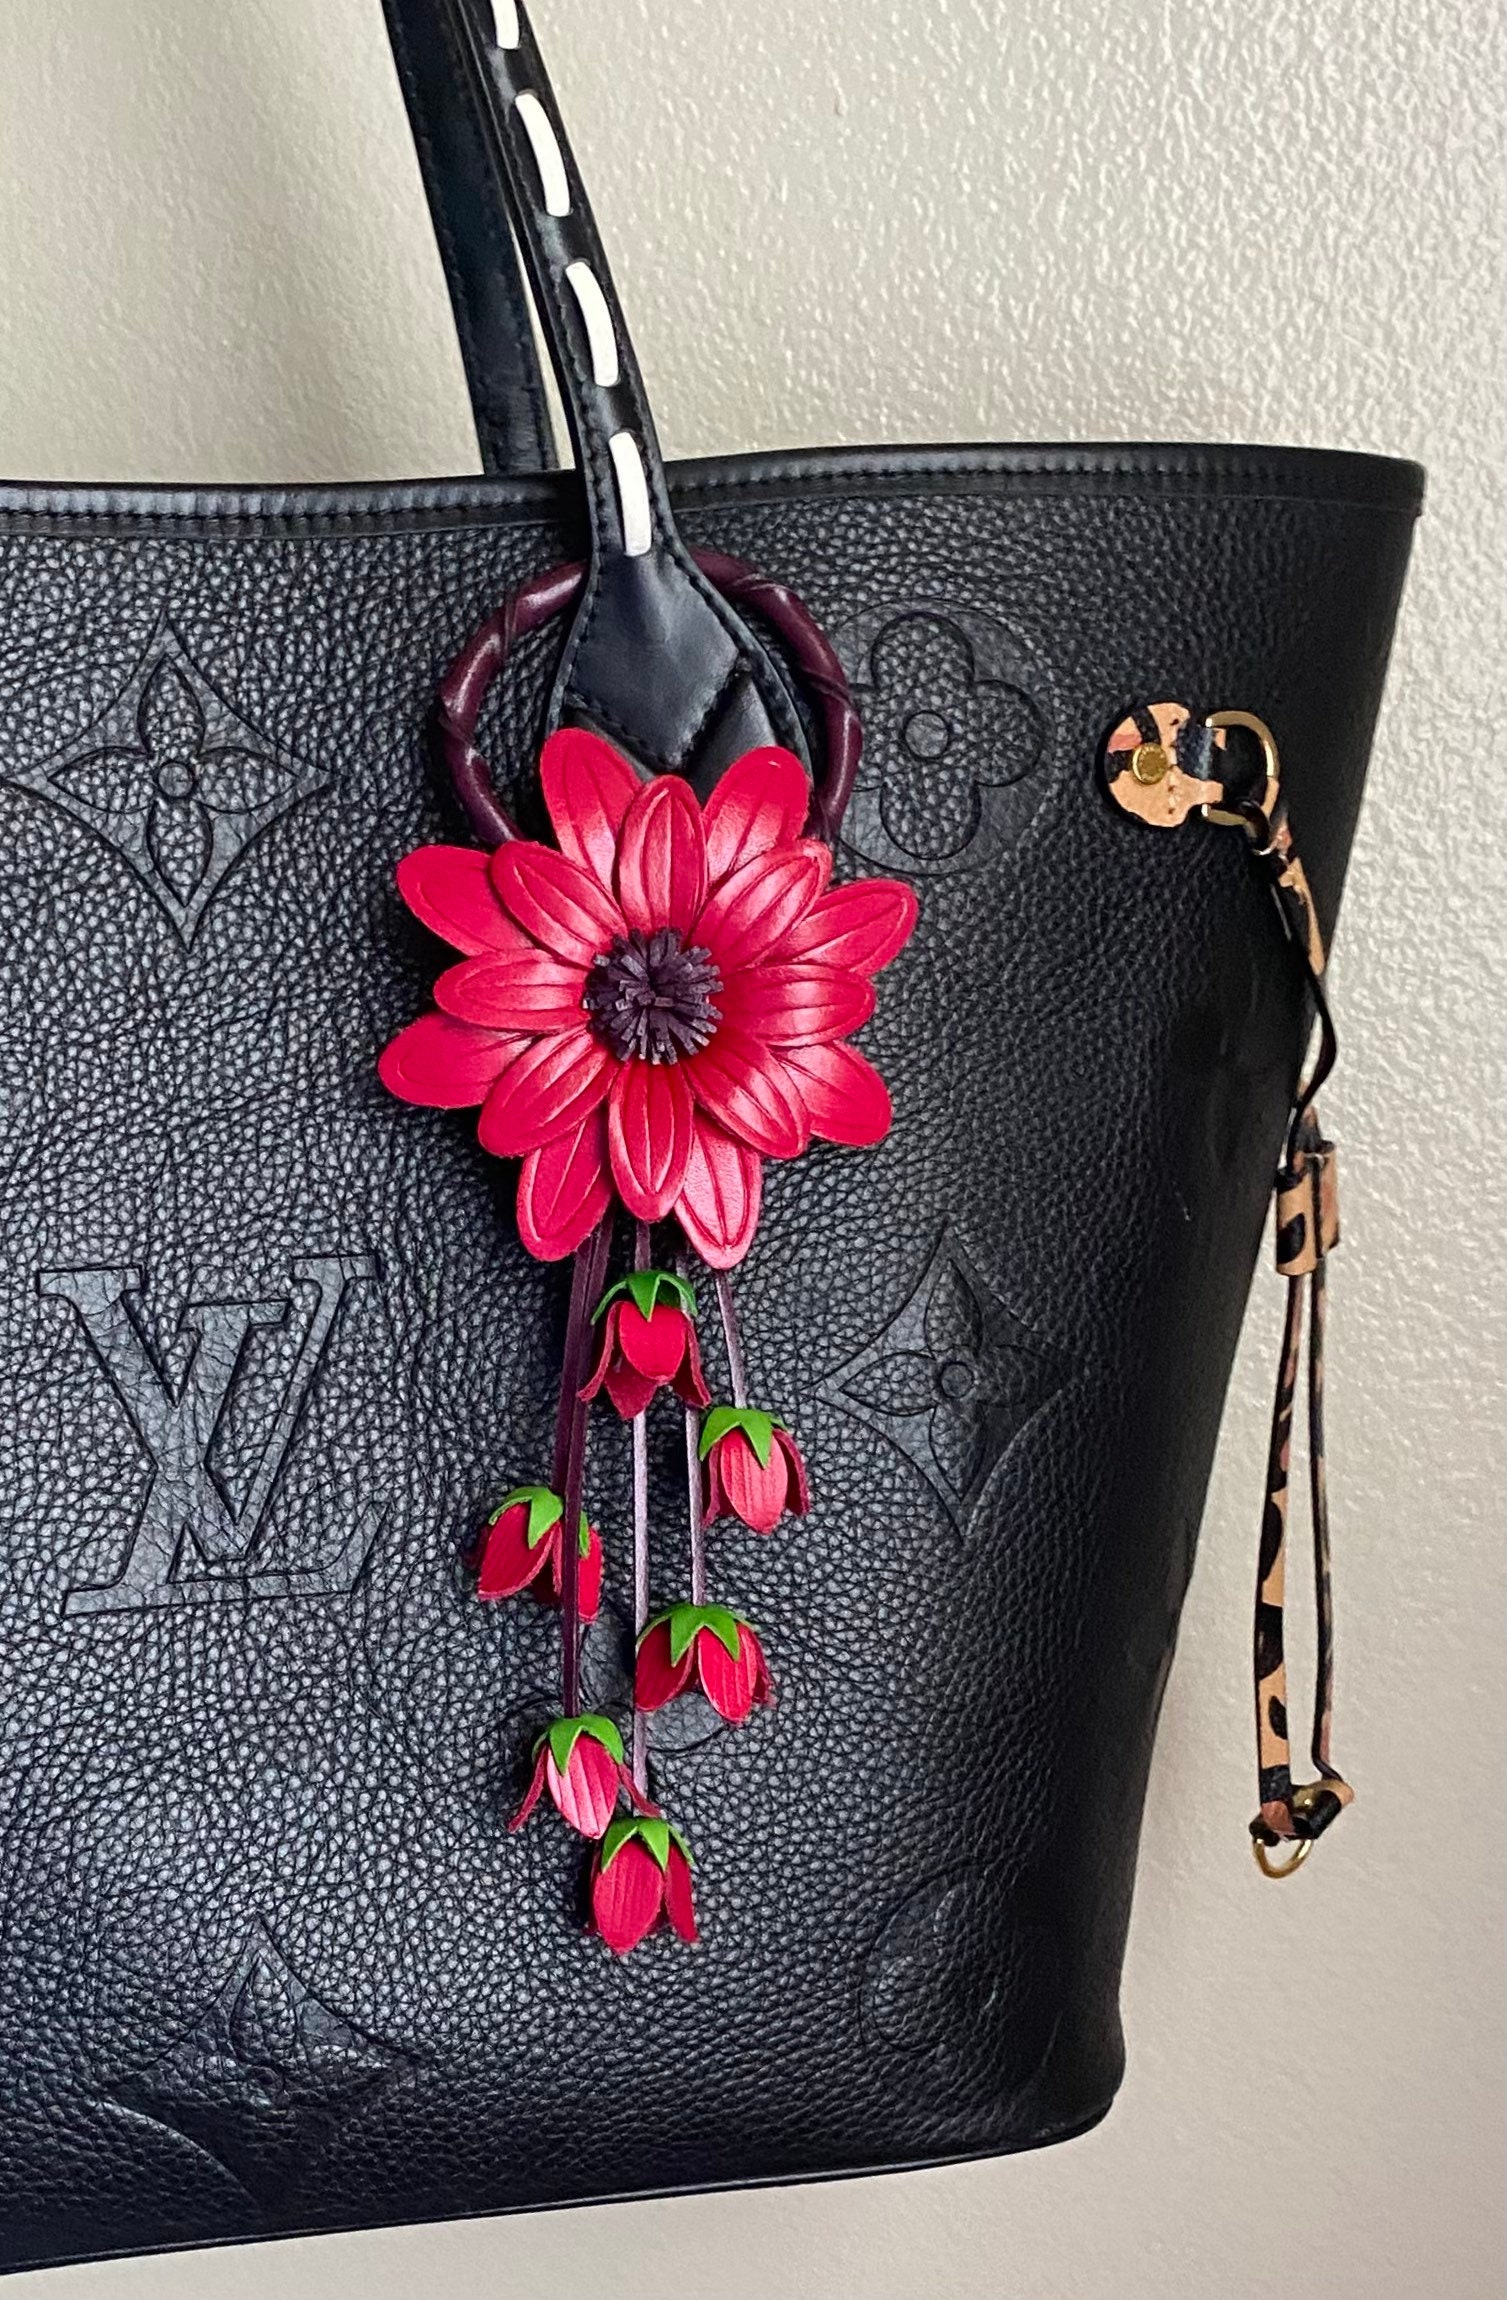 NEW LOUIS VUITTON Yellow Green FLOWER Keychain Bag Charm from Neverfull